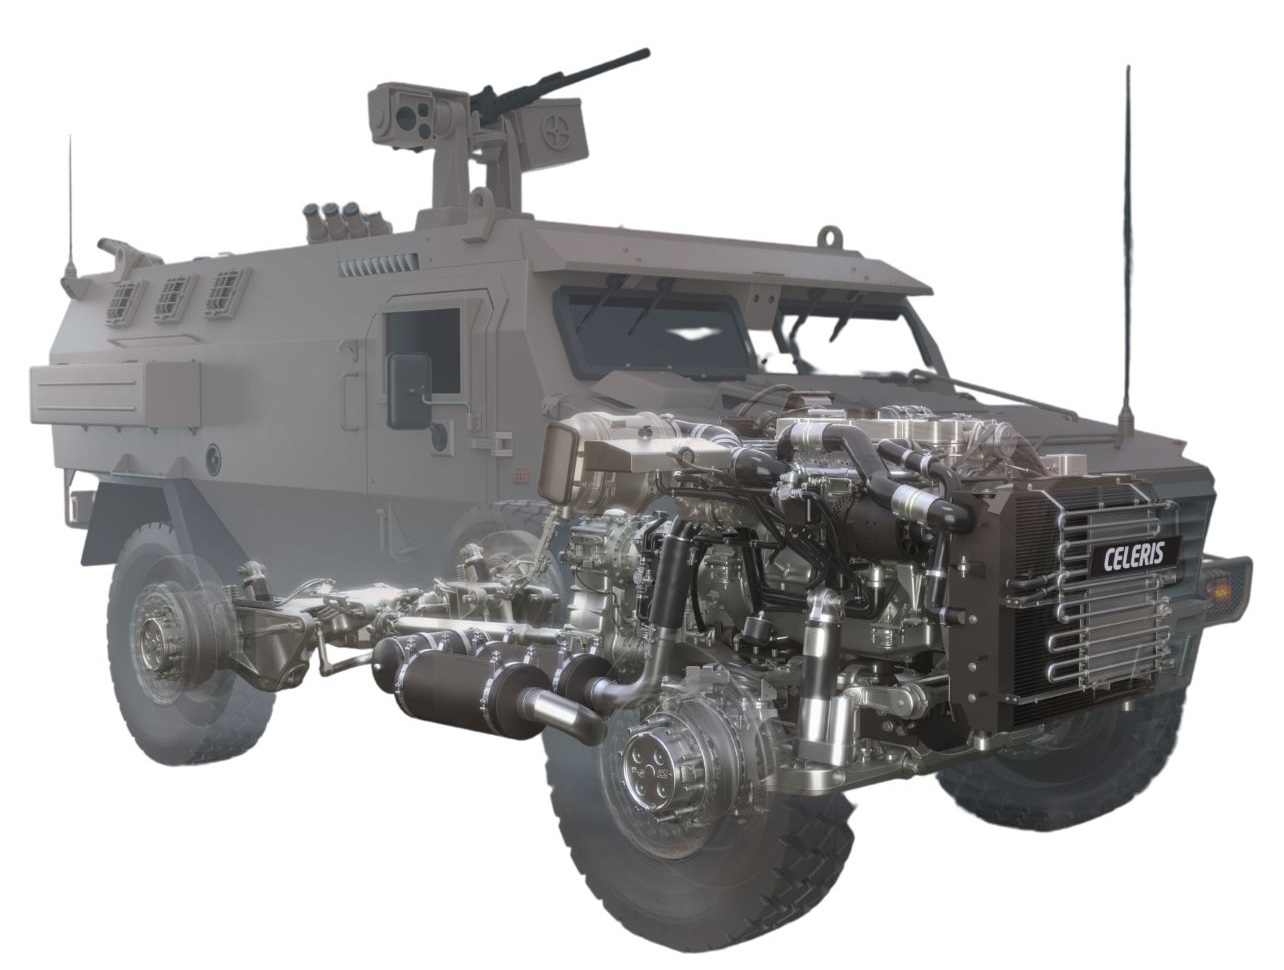 The Celeris 4×4 chassis features 12 base kits including axle, powerpack, transmission, transfer case, steering system, and 30 optional kits depending on the configuration of the vehicle.